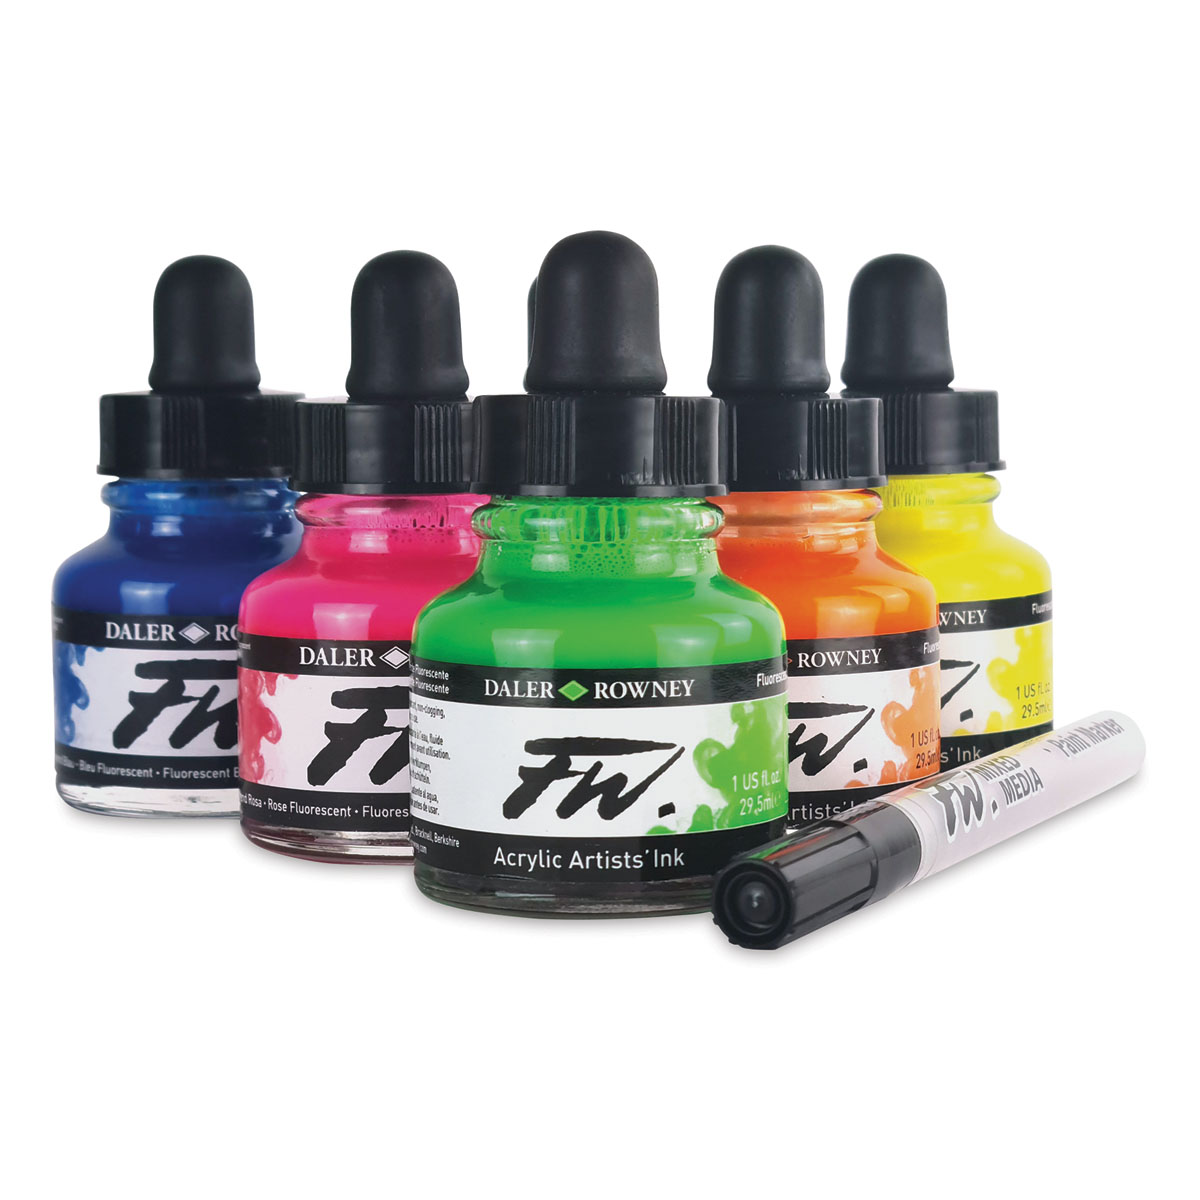 Daler-Rowney - Hooked on FW Acrylic #Ink? Just a tip